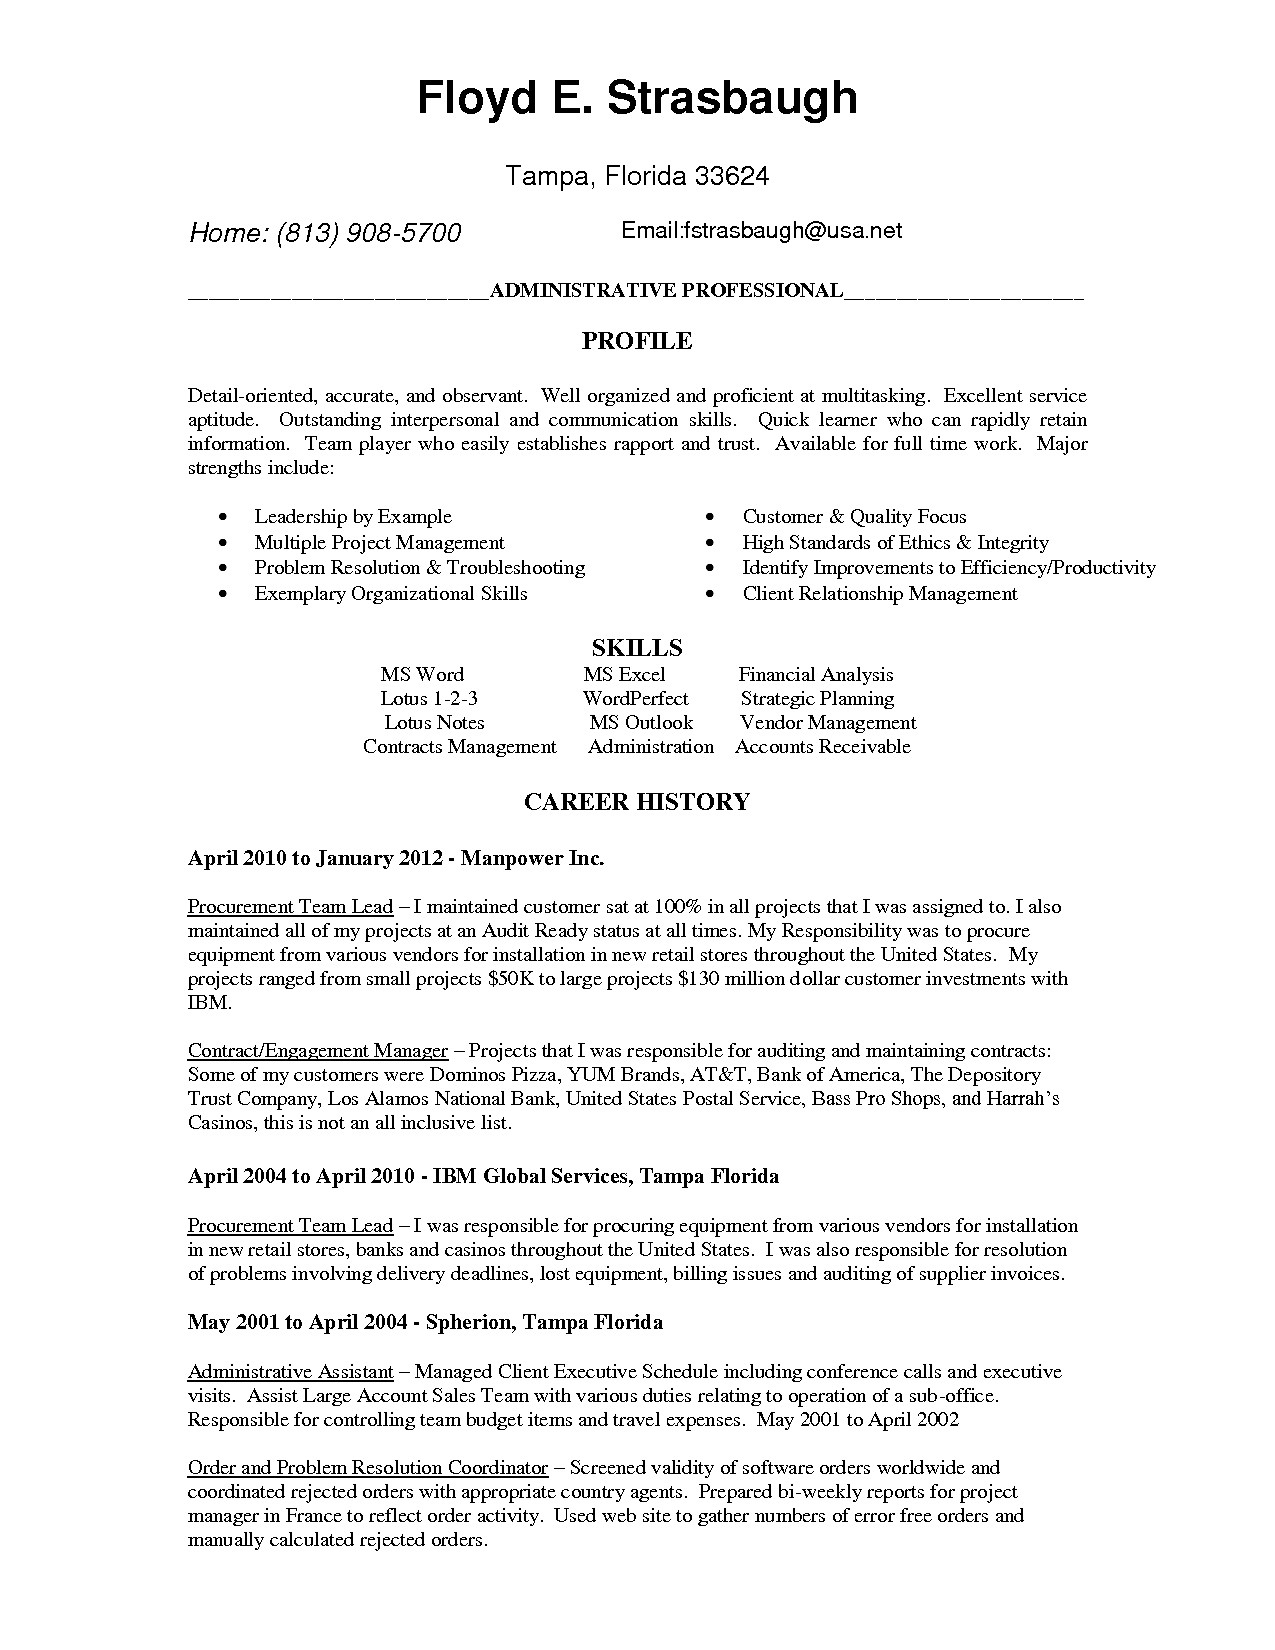 Business Plan Cover Letter Template - Business Operating Plan Template Valid Business Cover Letter